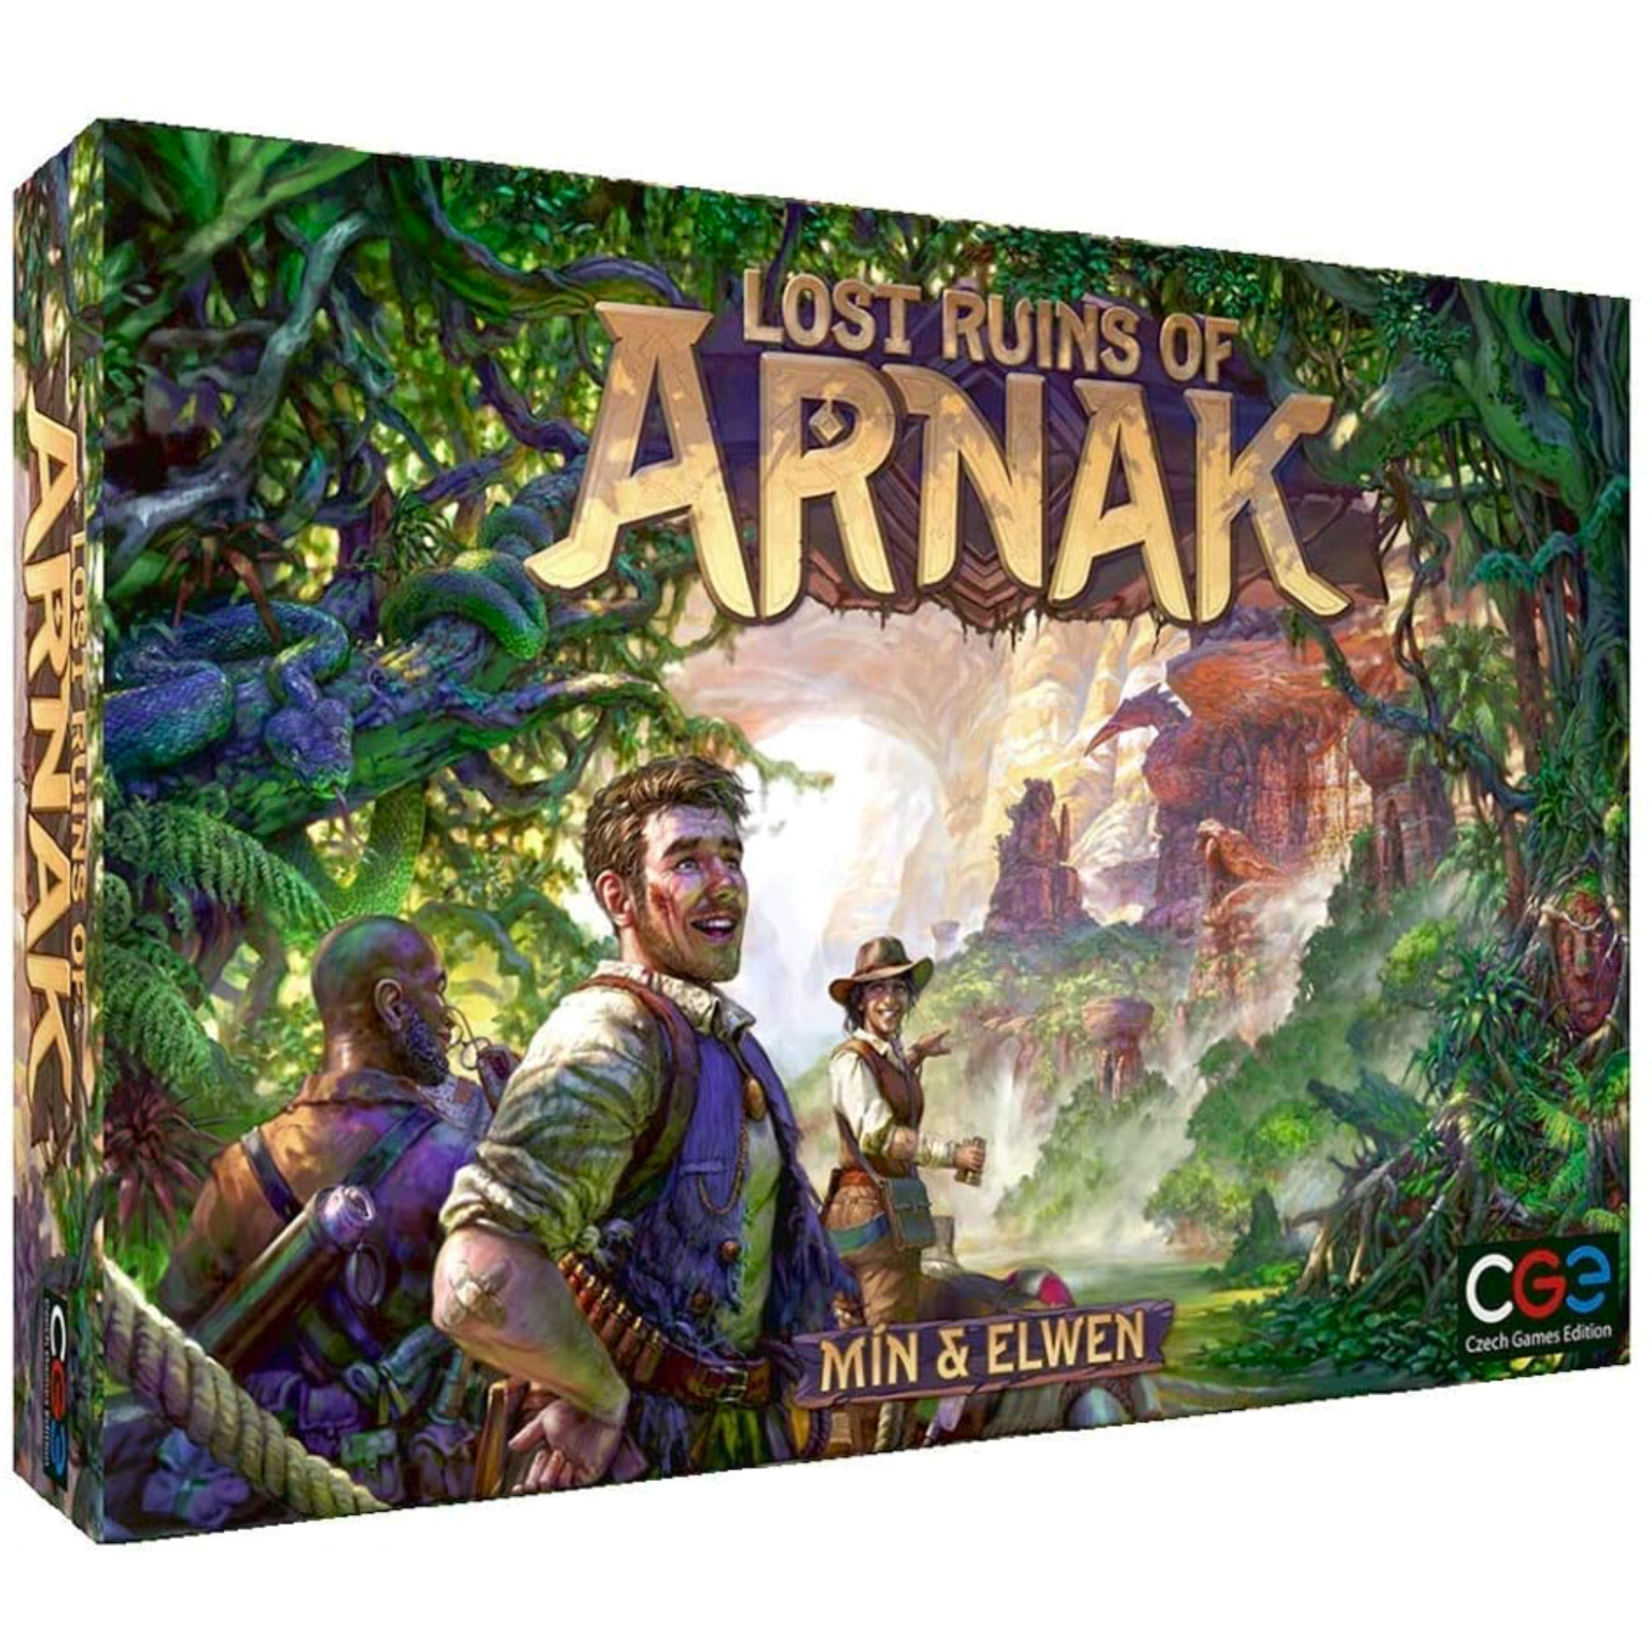 Czech Games Editions Lost Ruins of Arnak